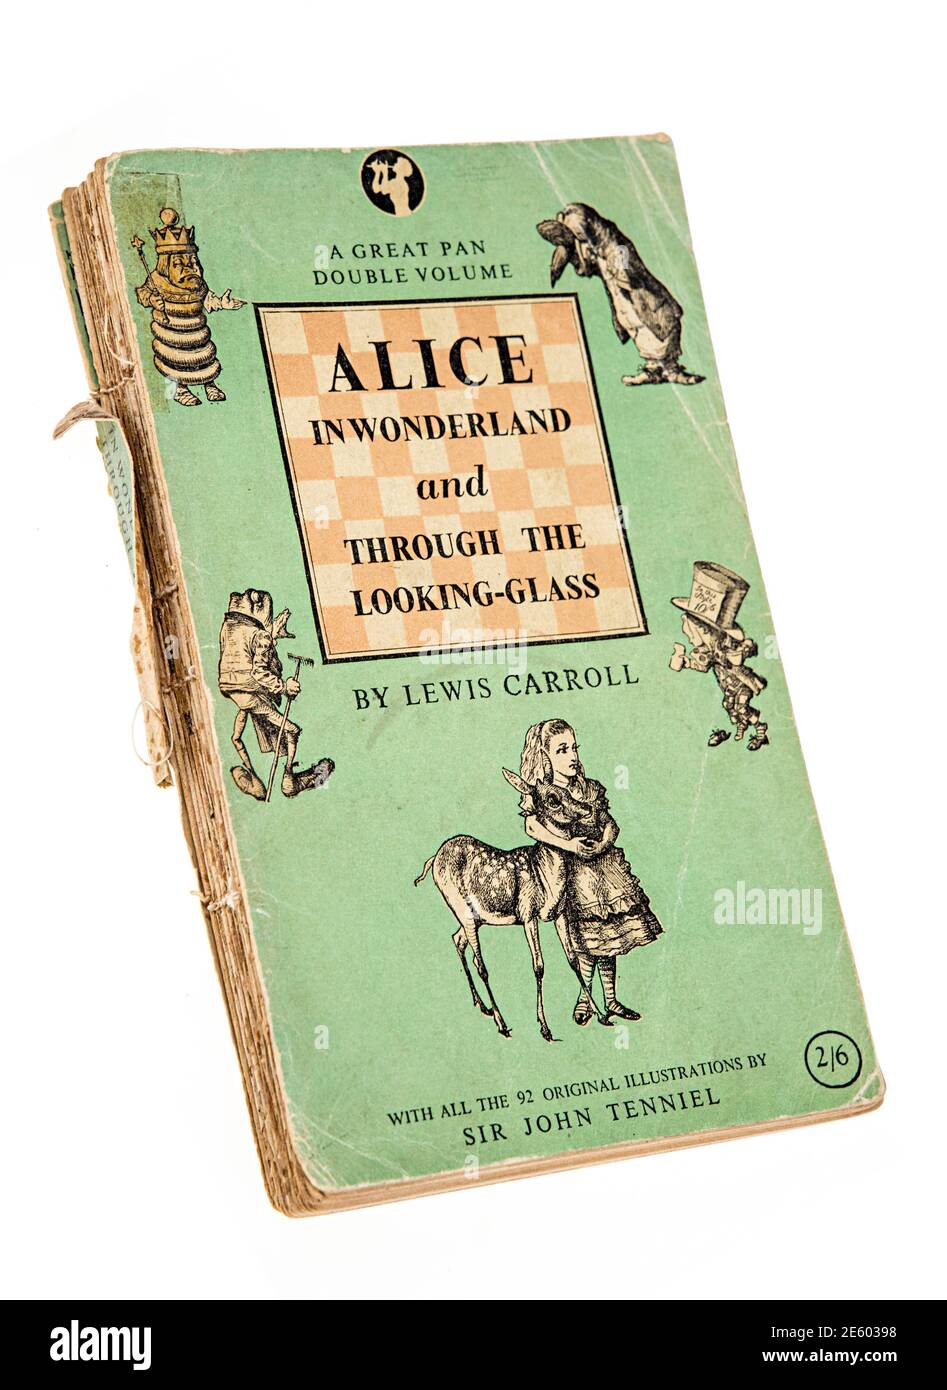 Alice in Wonderland and Through the Looking Glass paperback book by Lewis Carroll published by Pan in 1947 Stock Photo